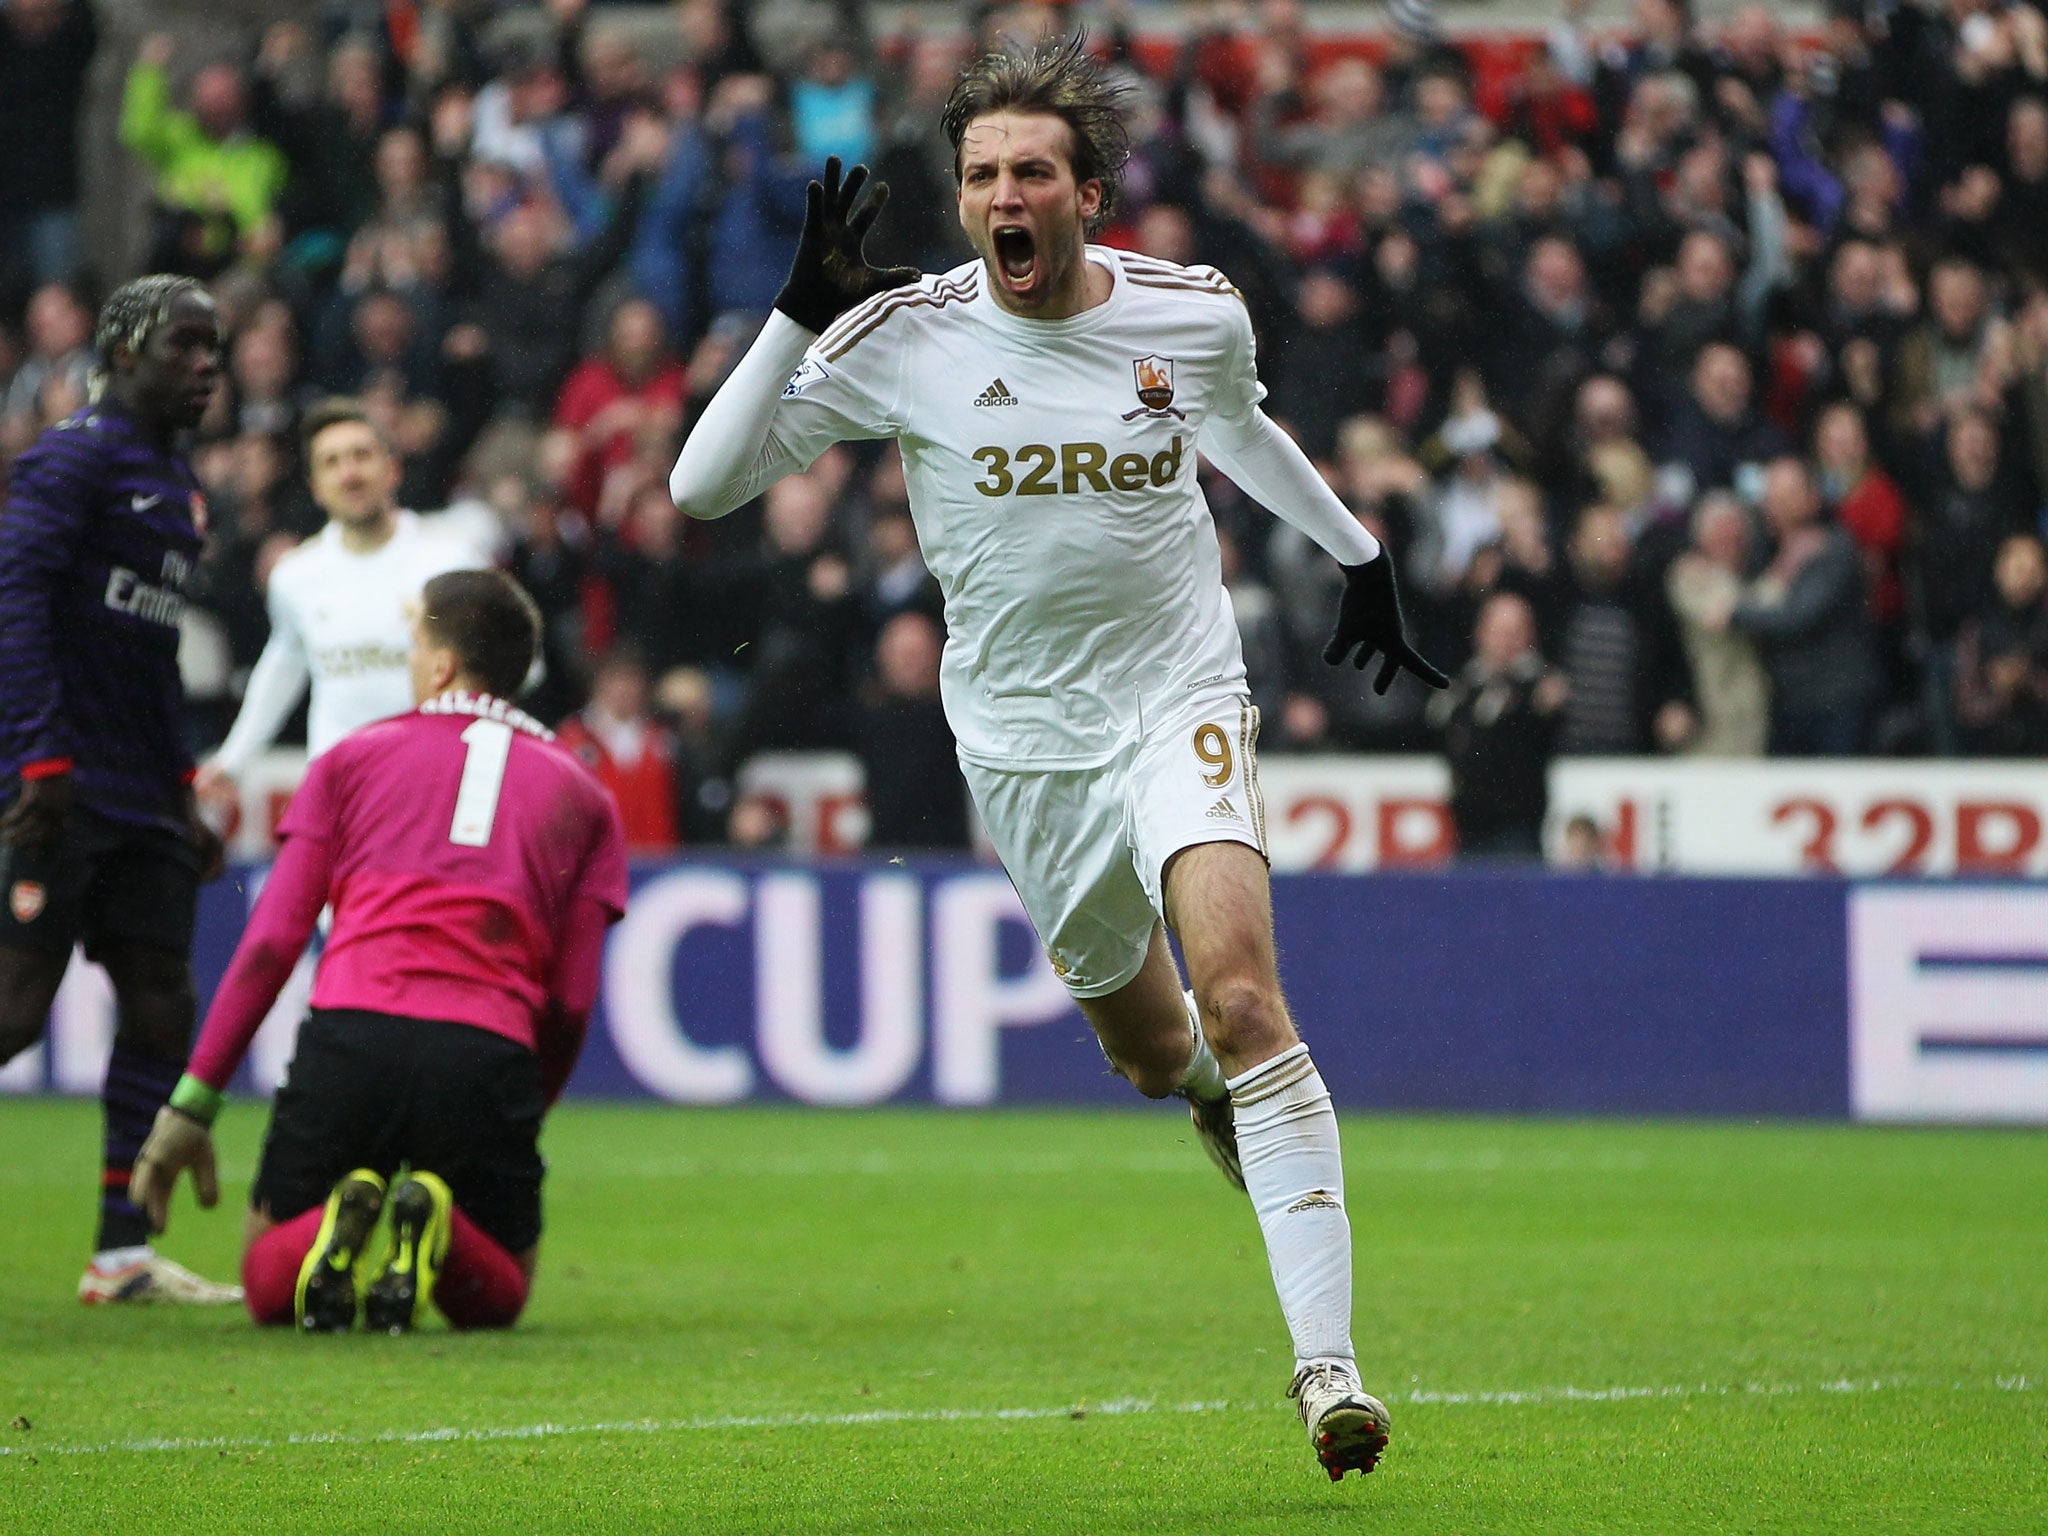 Miguel Michu of Swansea City celebrates as he scores their first goal